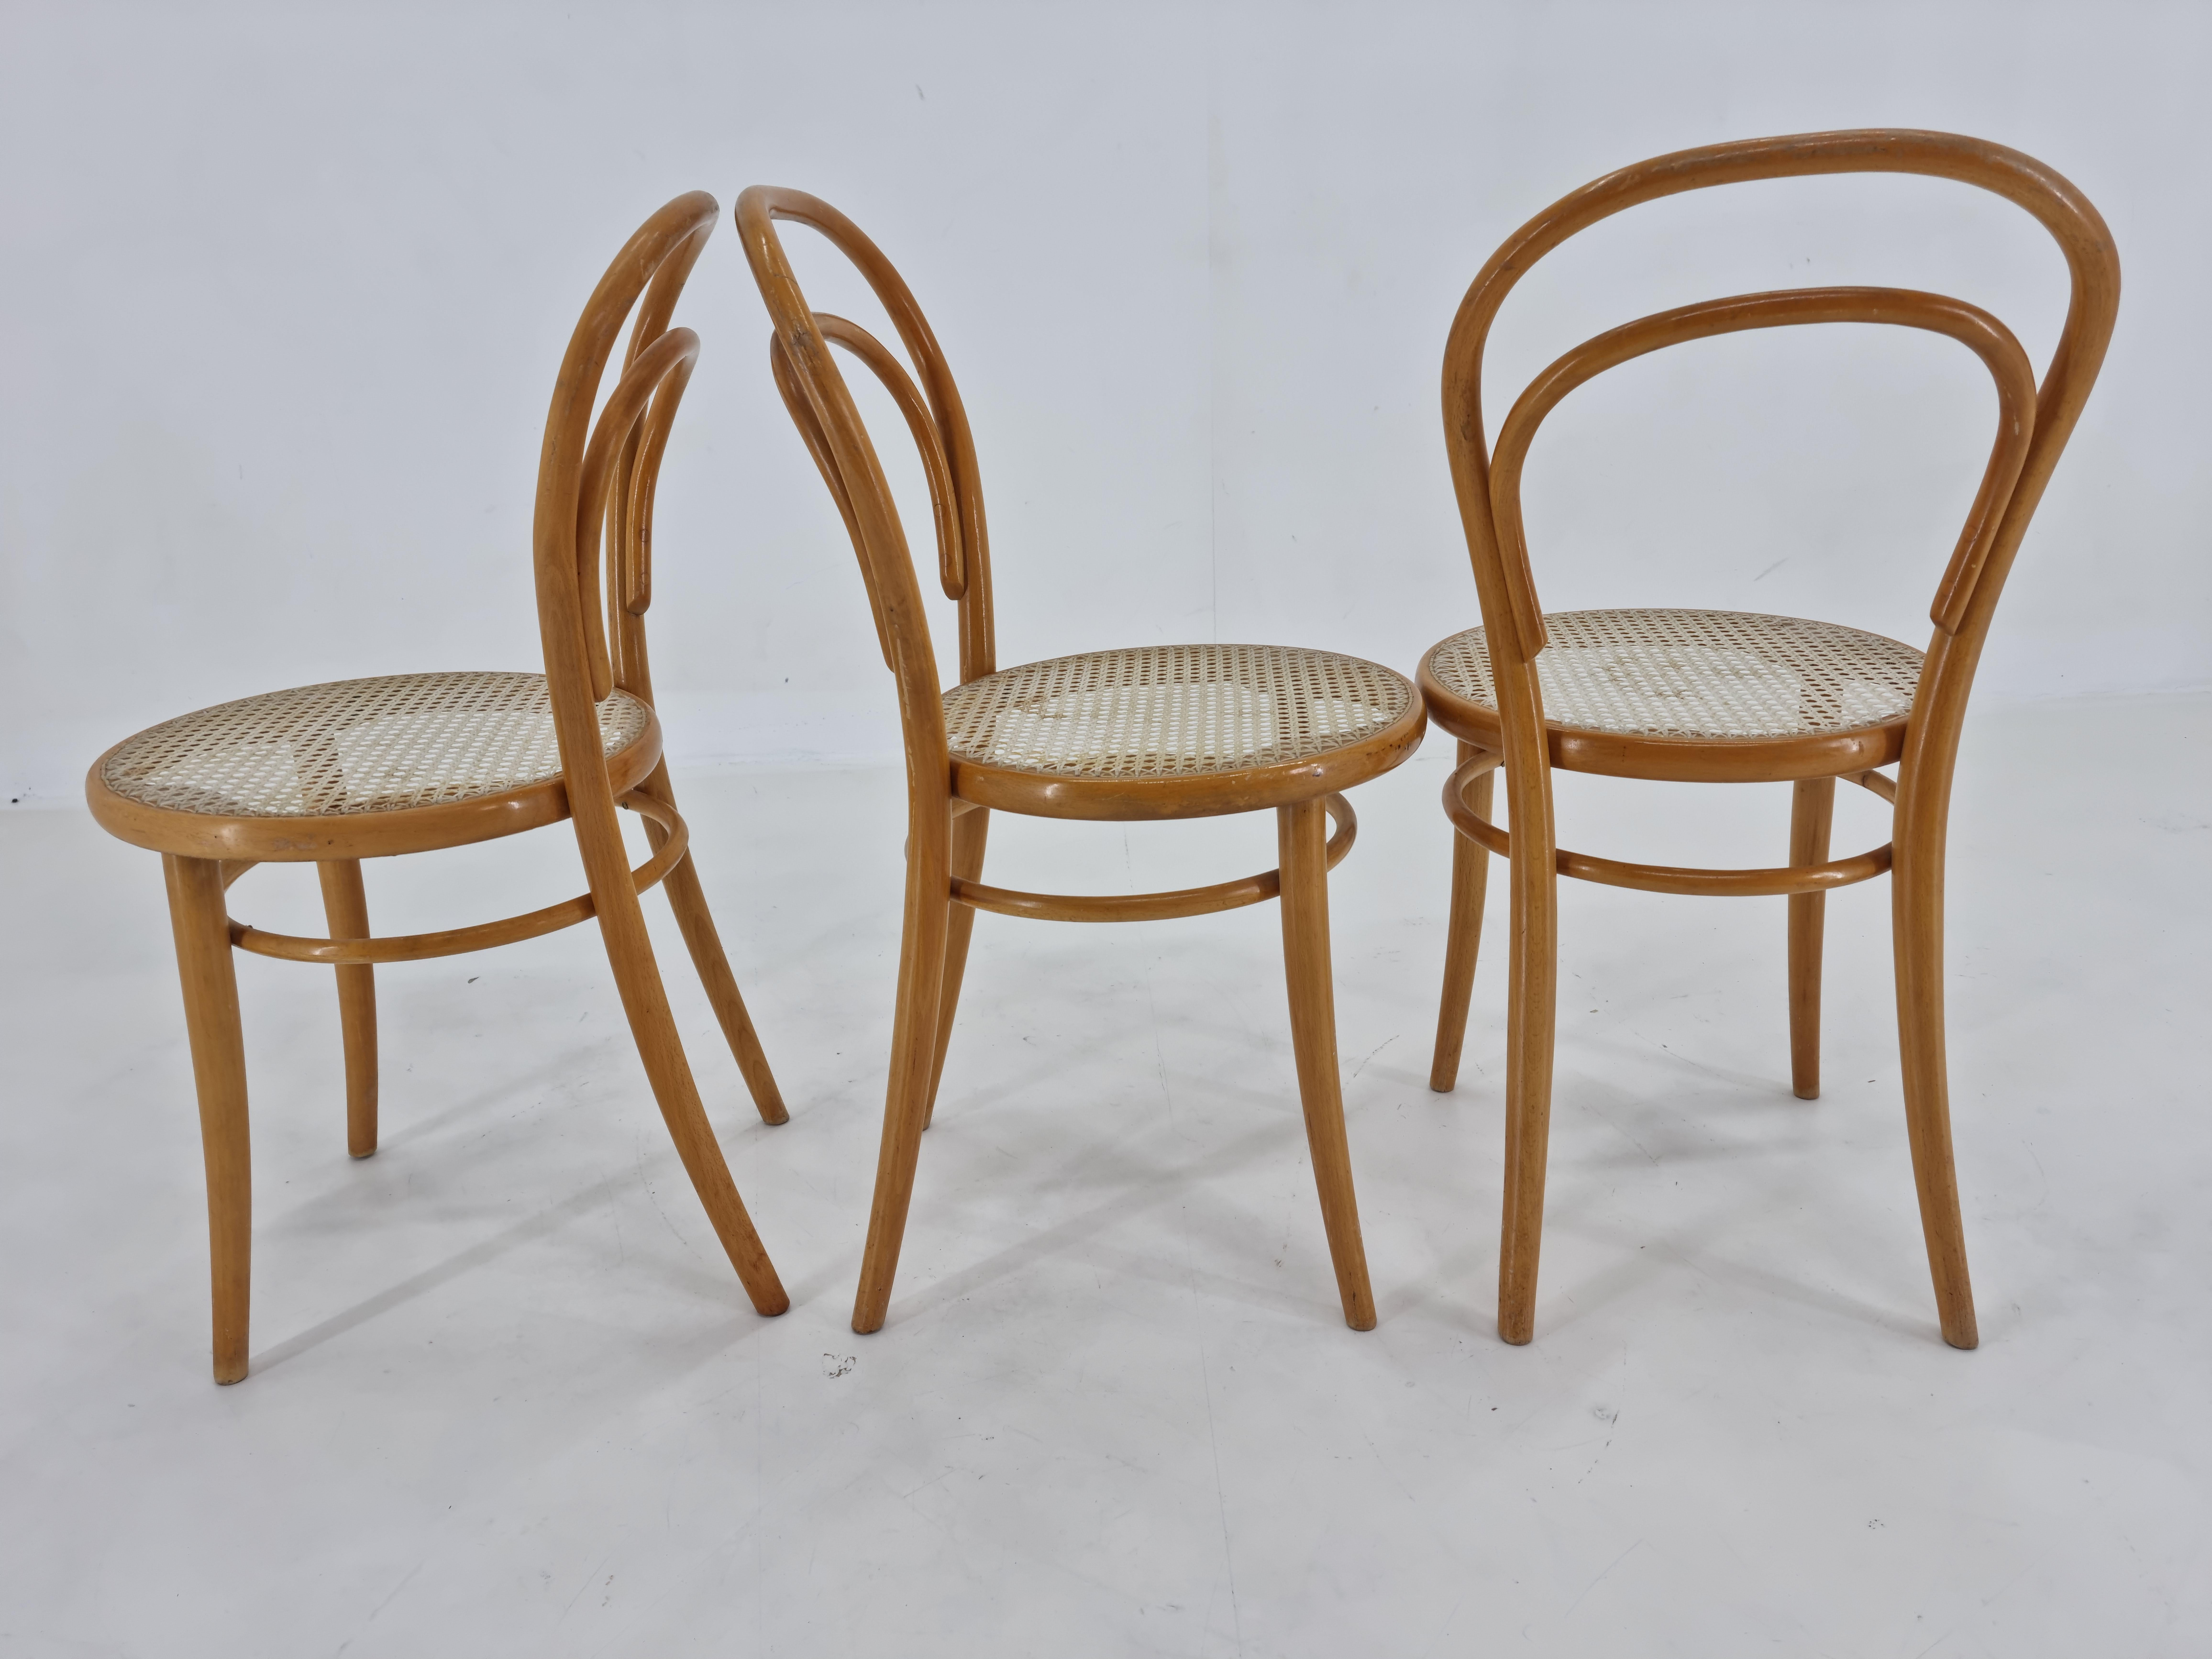 Set of Three Bentwood Chairs Nr. 14, Ton, Michael Thonet, 1950s 1